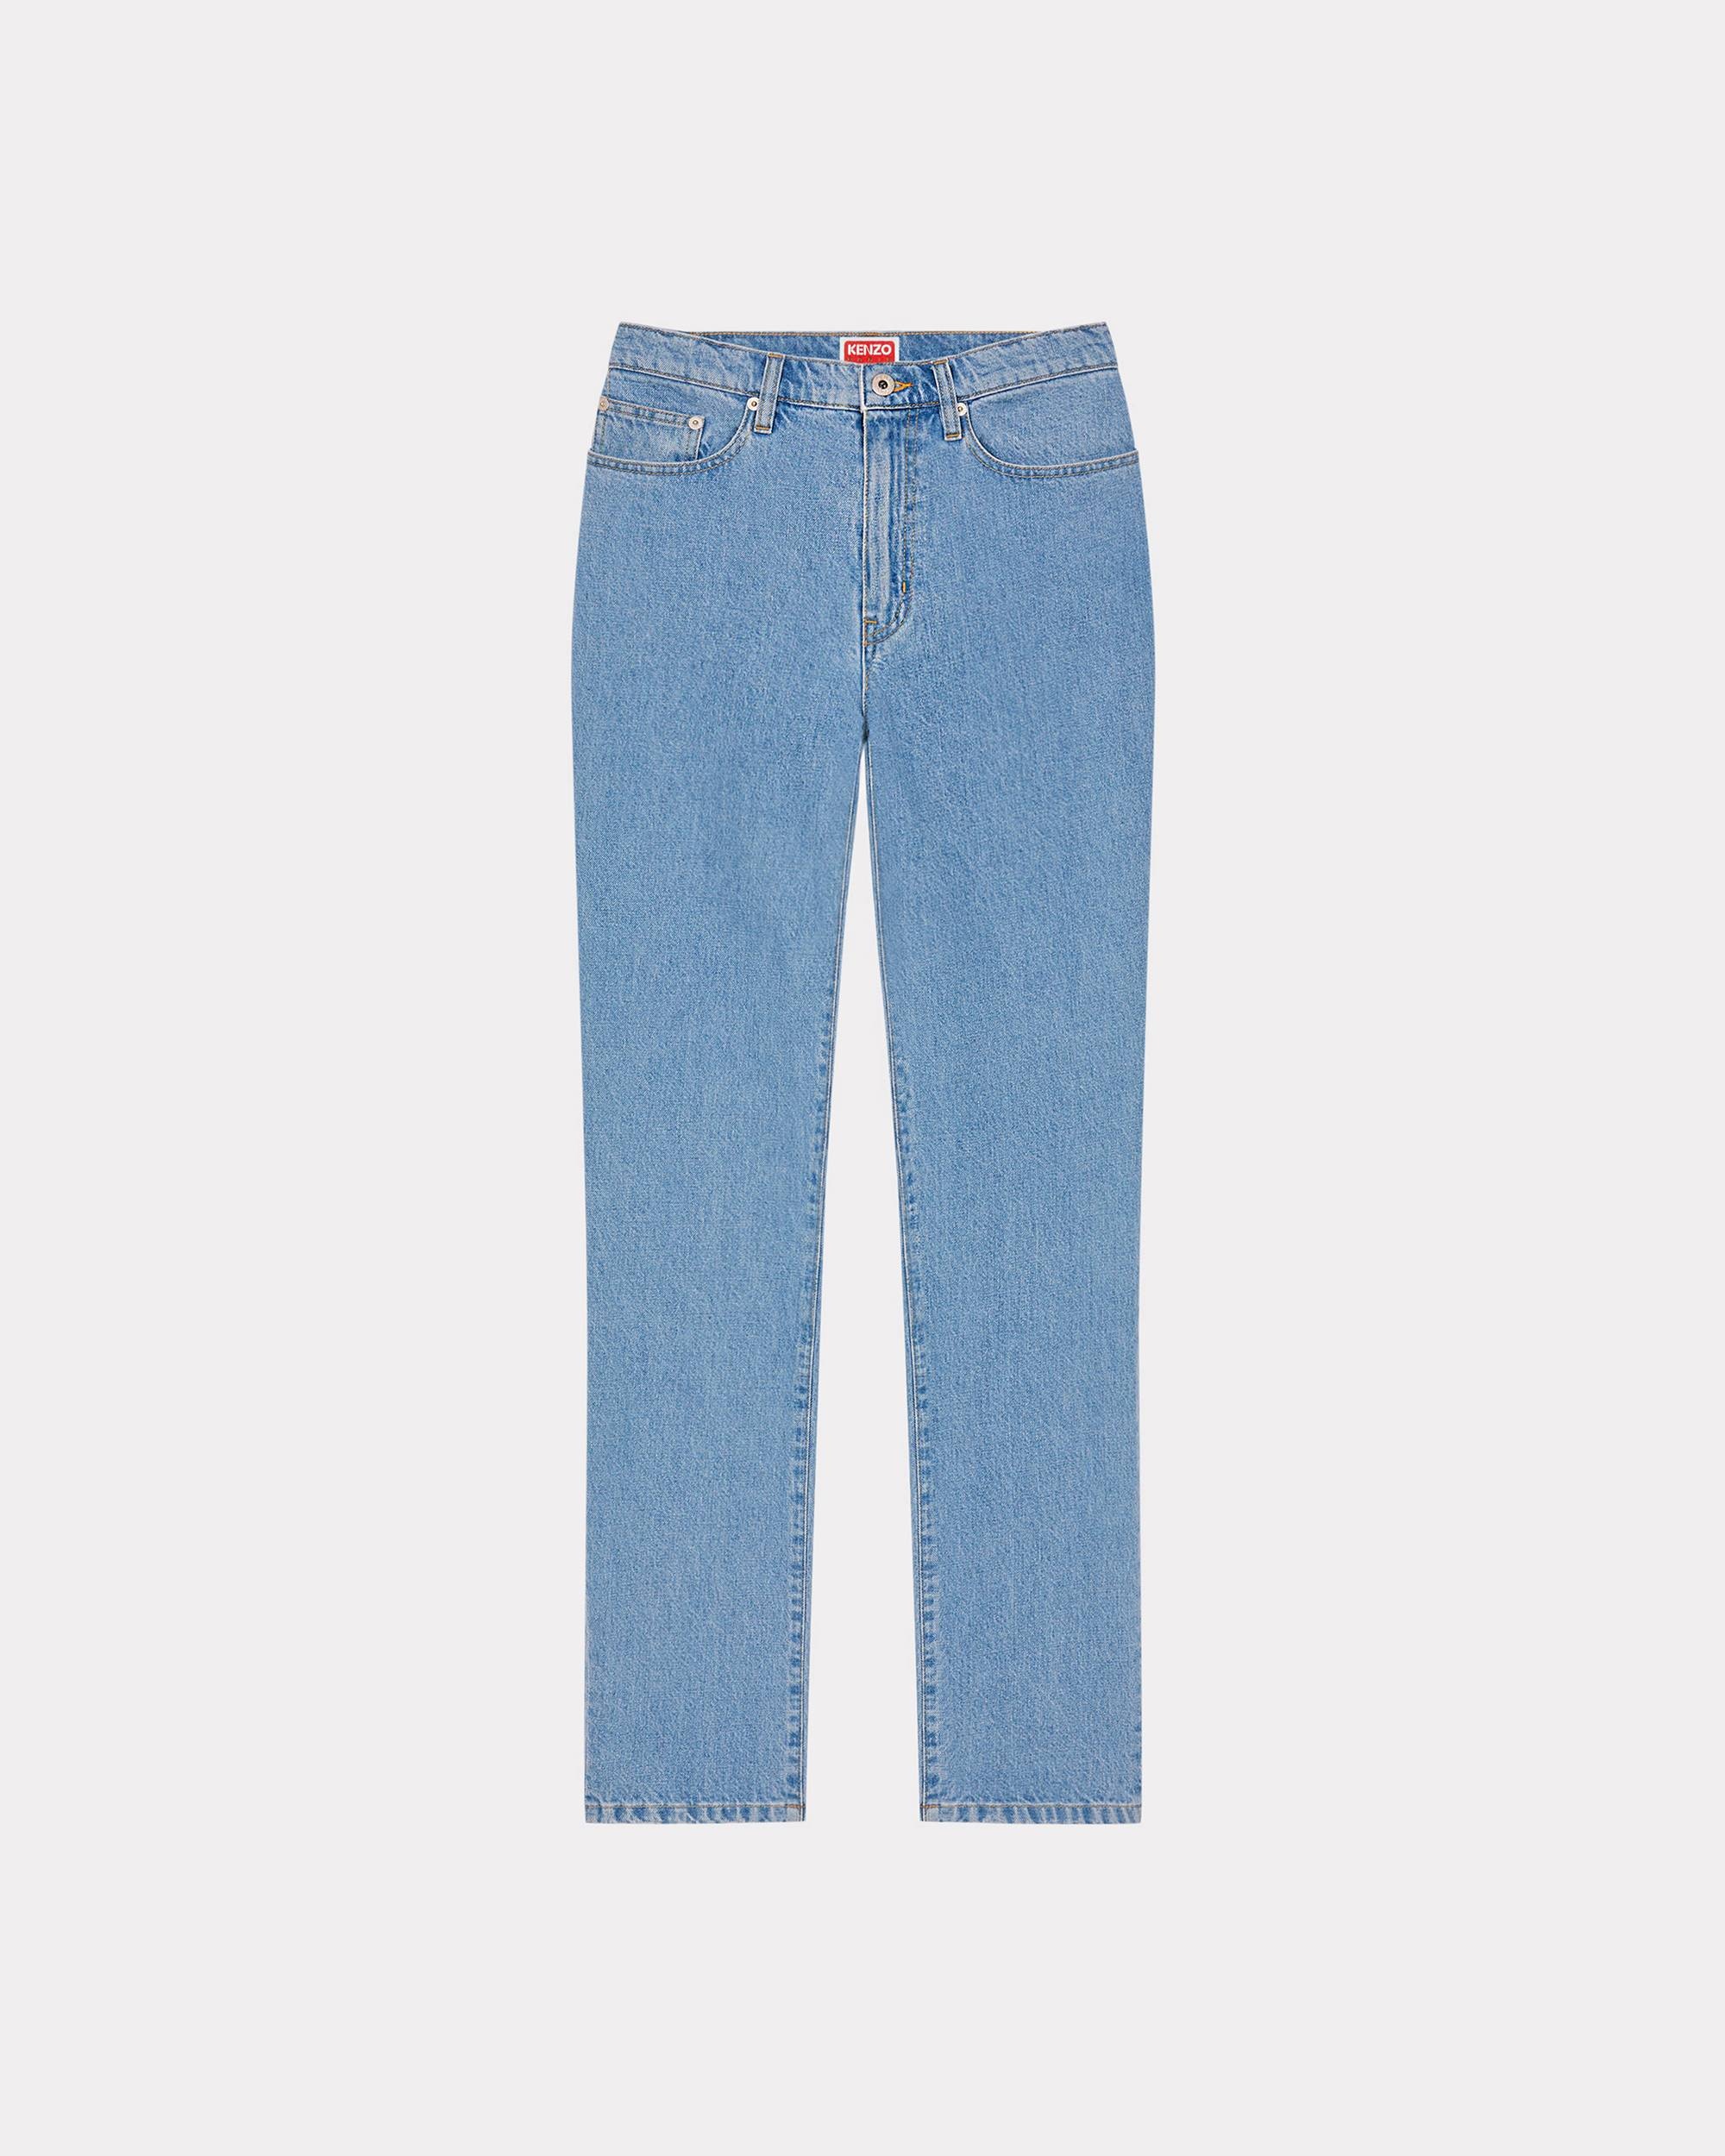 'Year of the Dragon' cropped embroidered ASAGAO jeans - 1